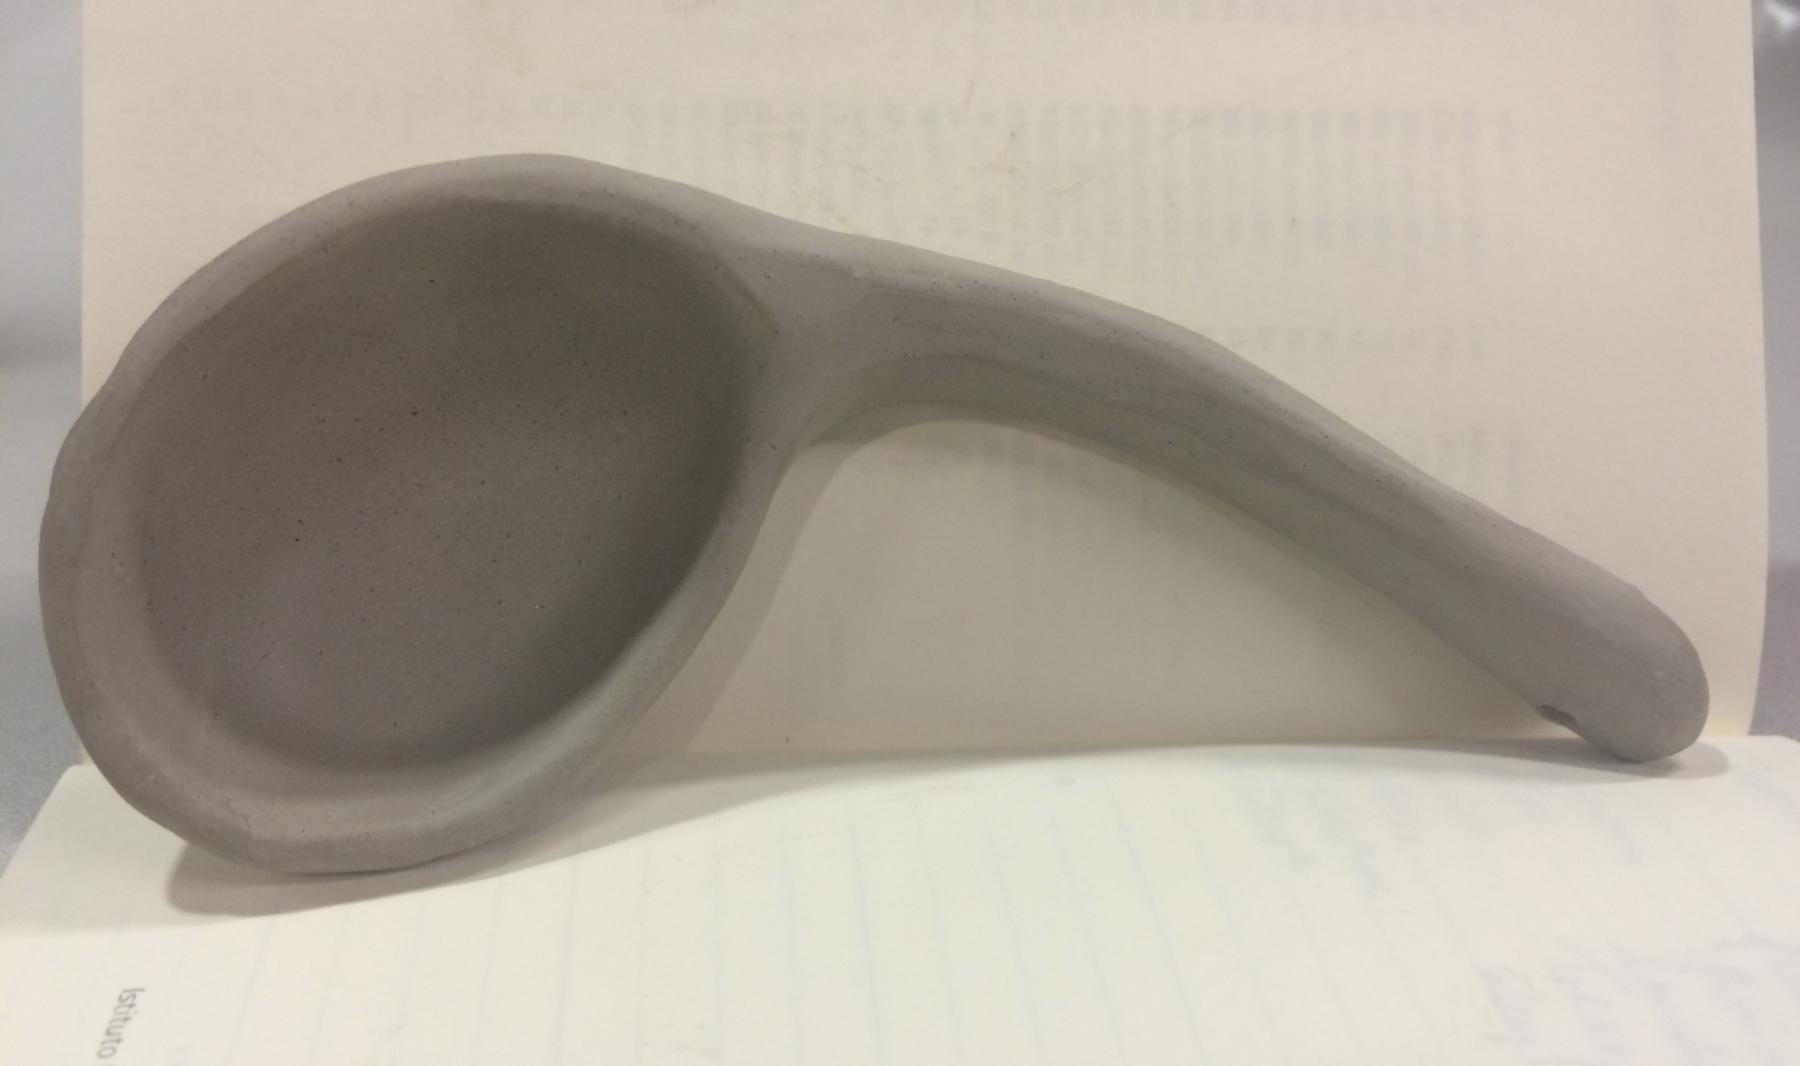 Spoon designed for only right-handed